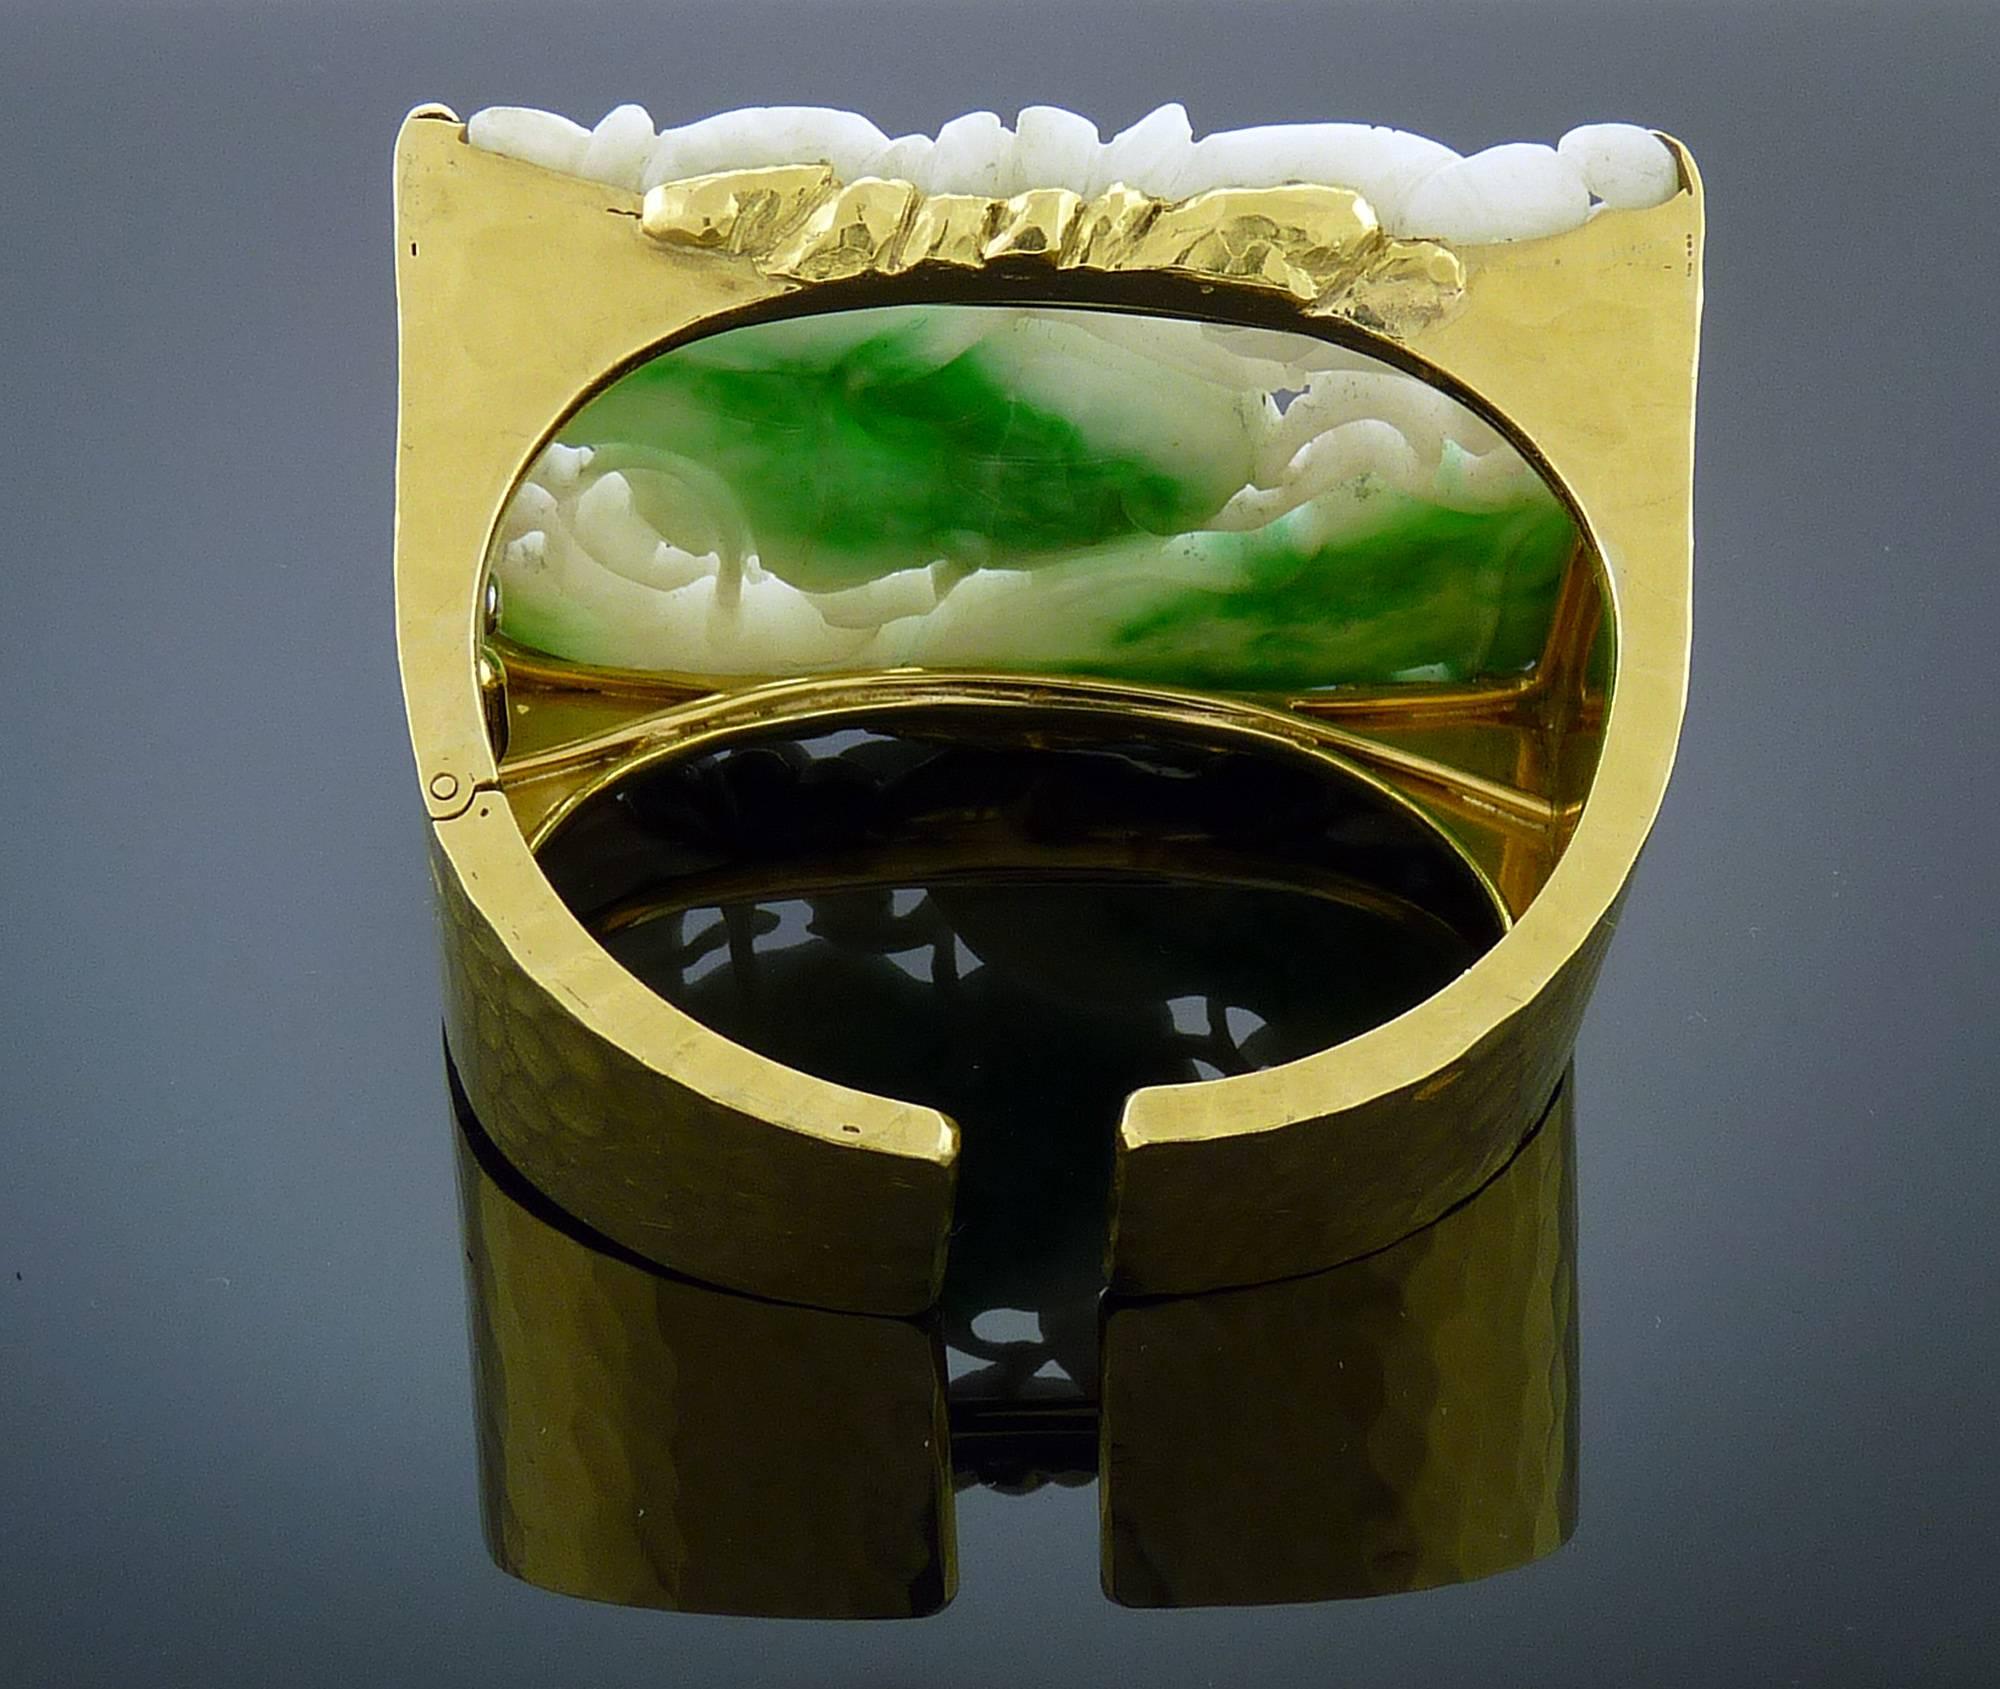 Designed as a tapered hinged 18k gold textured cuff, centered a rectangular shaped Jade carving (measuring approximately 2.5in x 1.75in)
Mounted in 18k Yellow Gold.
Signed Webb for David Webb.